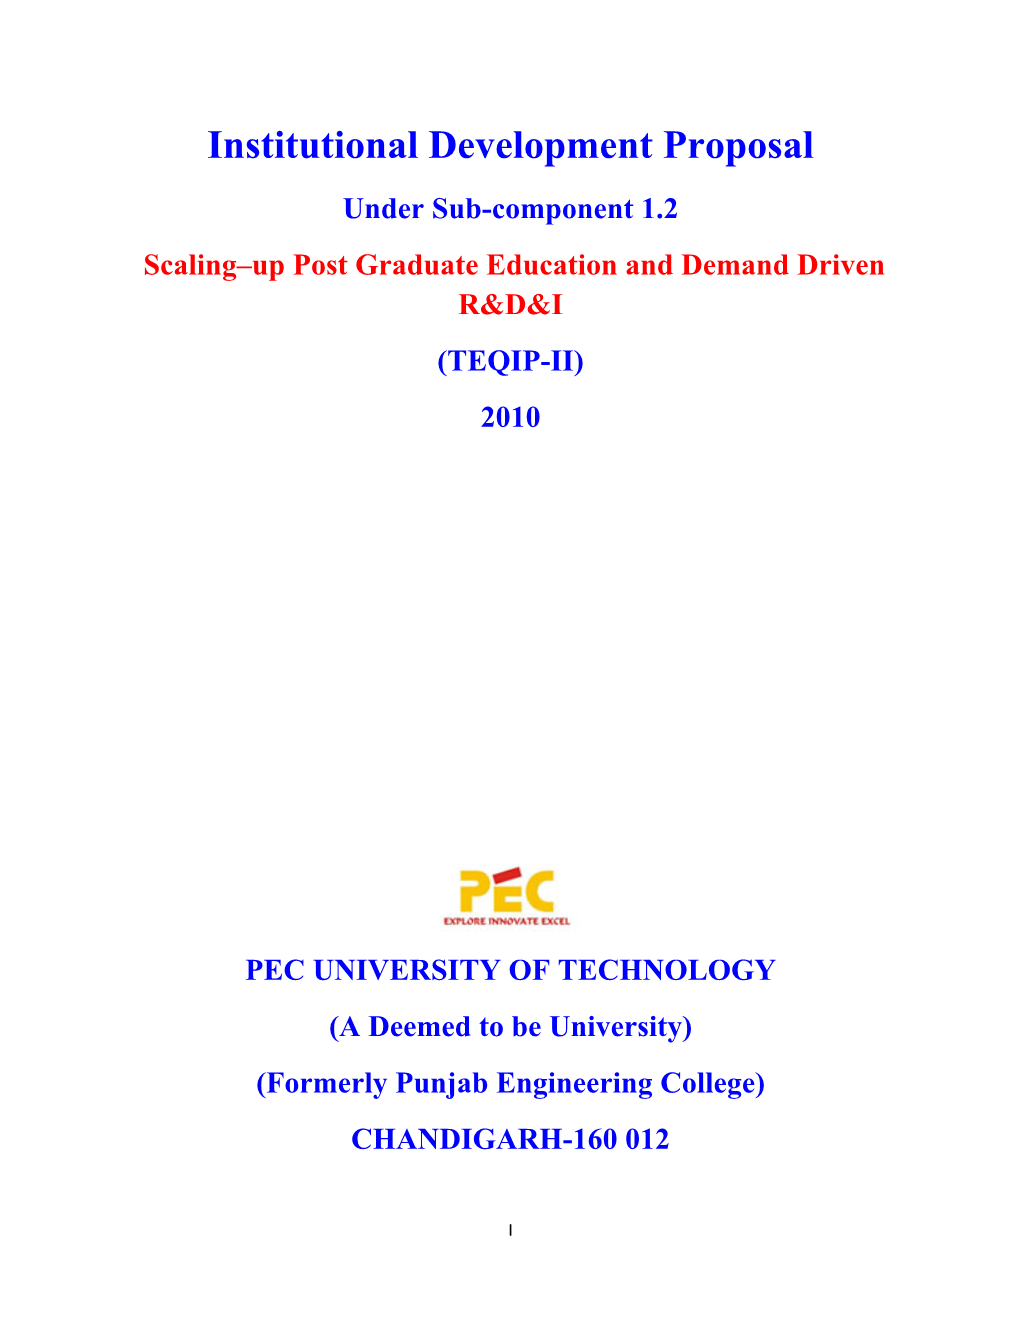 Institutional Development Proposal Under Sub-Component 1.2 Scaling–Up Post Graduate Education and Demand Driven R&D&I (TEQIP-II) 2010